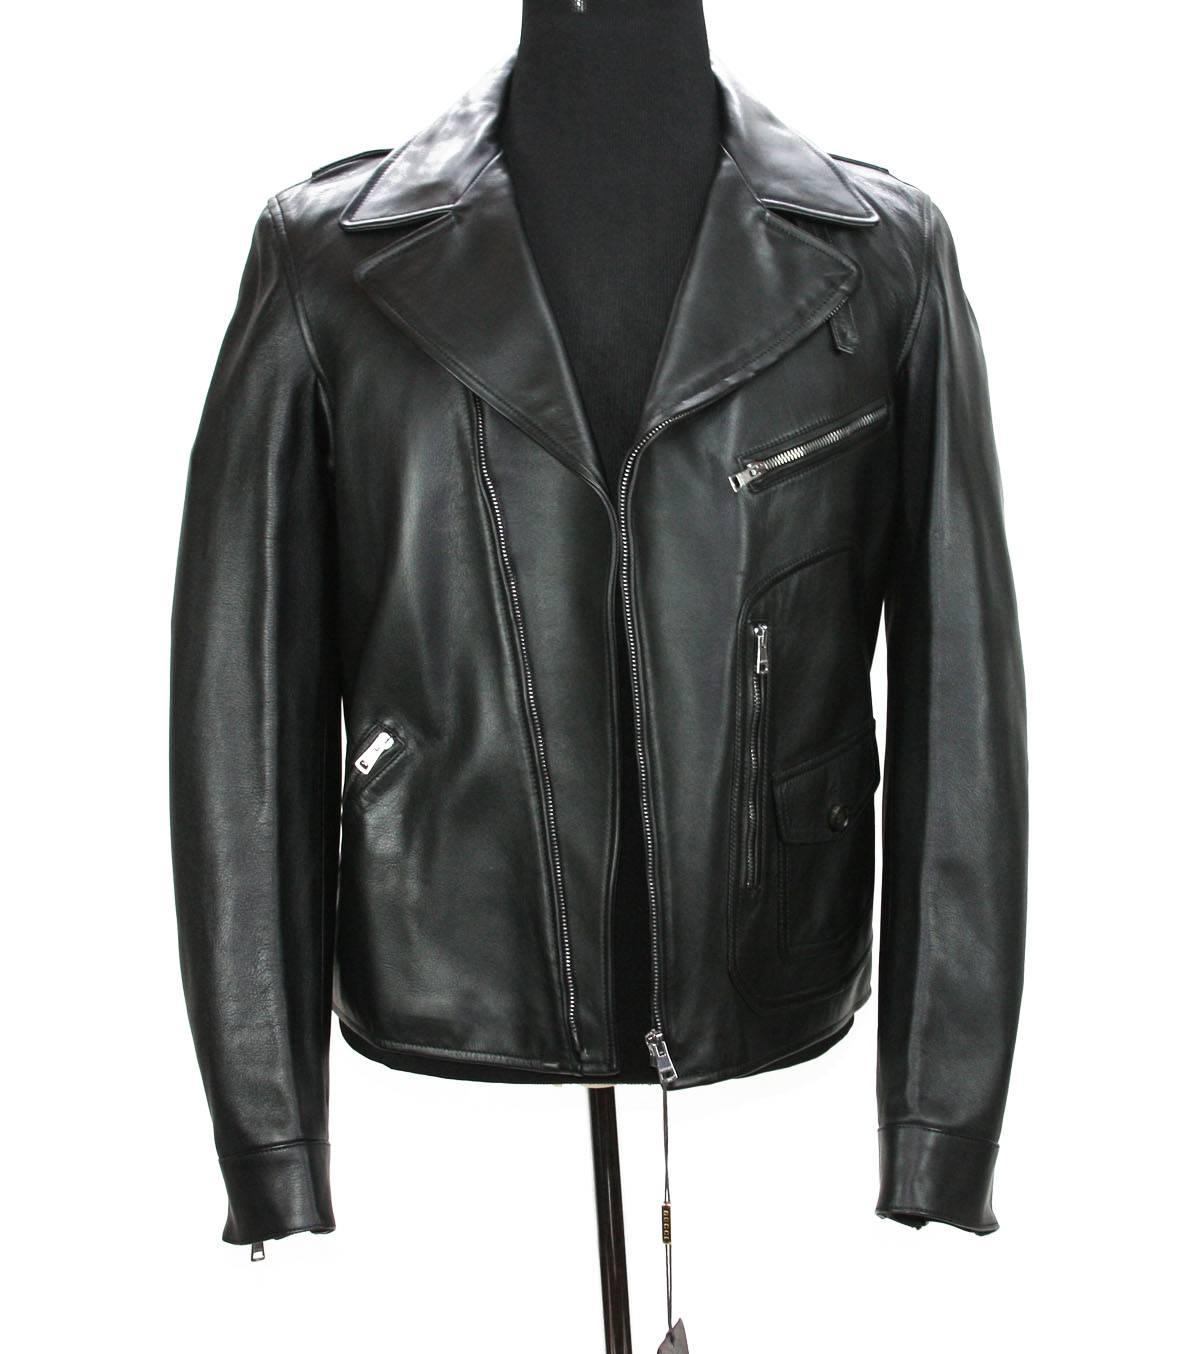 New GUCCI Men's Black Leather Moto Biker Jacket
Italian Size 50 - US 40
100% Leather, Black Color.
Single Front Zippered, Zip Cuffs Details, Four Style Pockets, One Inner Pocket.
Oversize Metal Hardware, Fully Lined, Embossed GUCCI Trademark